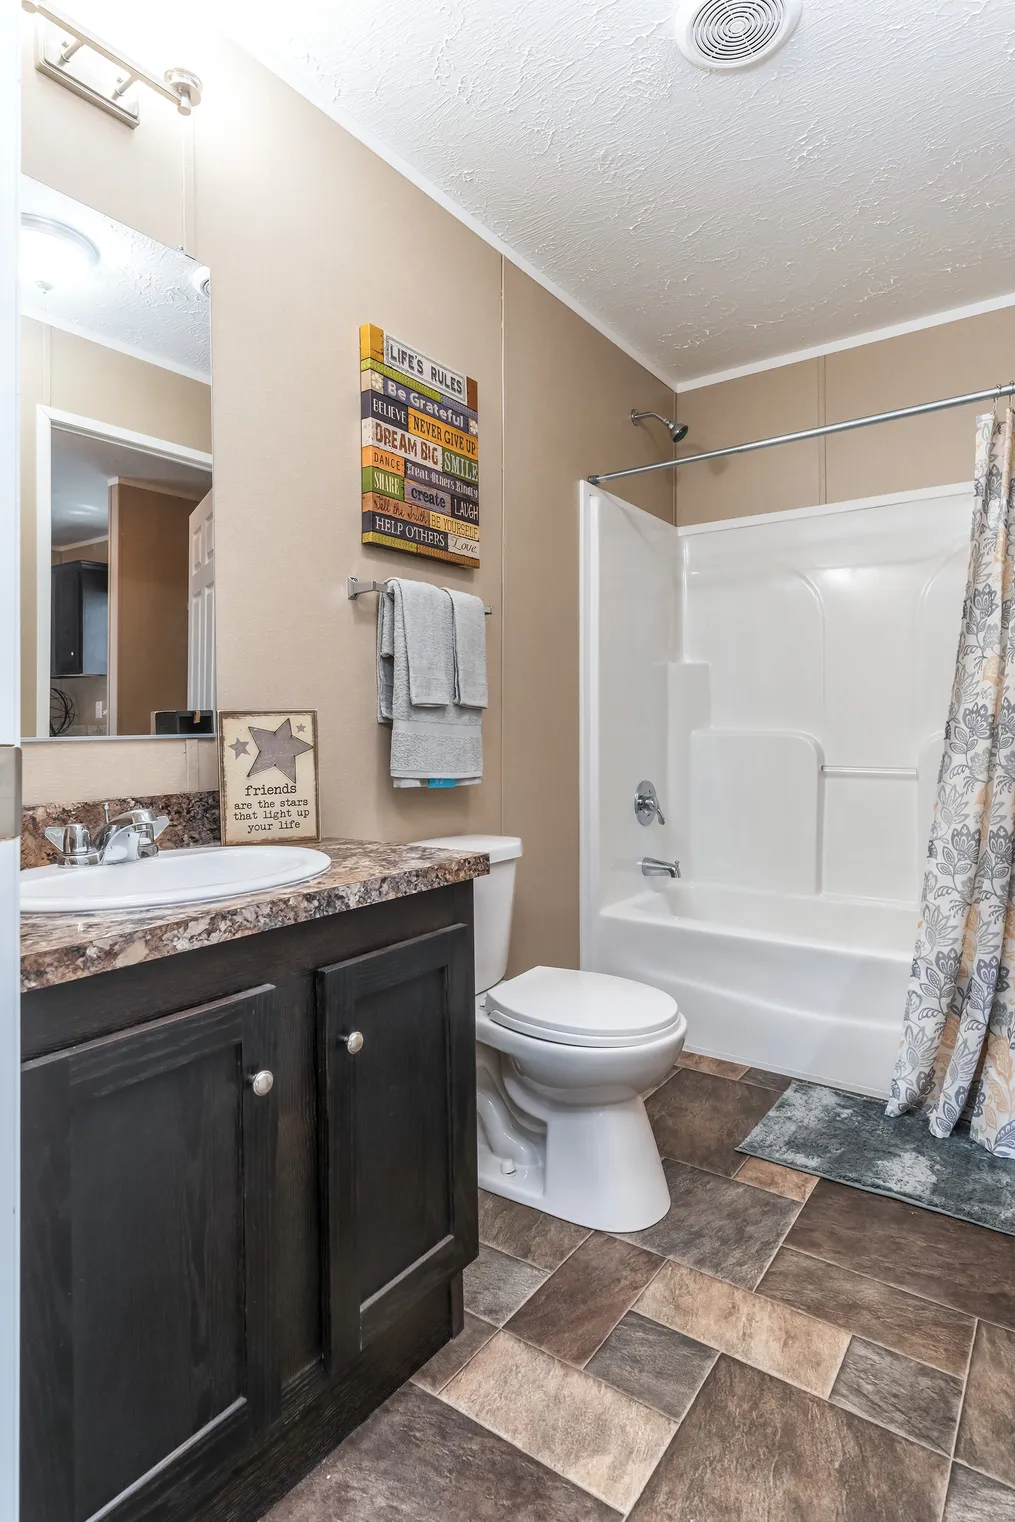 The 5604 ENTERPRISE 4 6428 Guest Bathroom. This Manufactured Mobile Home features 3 bedrooms and 2 baths.